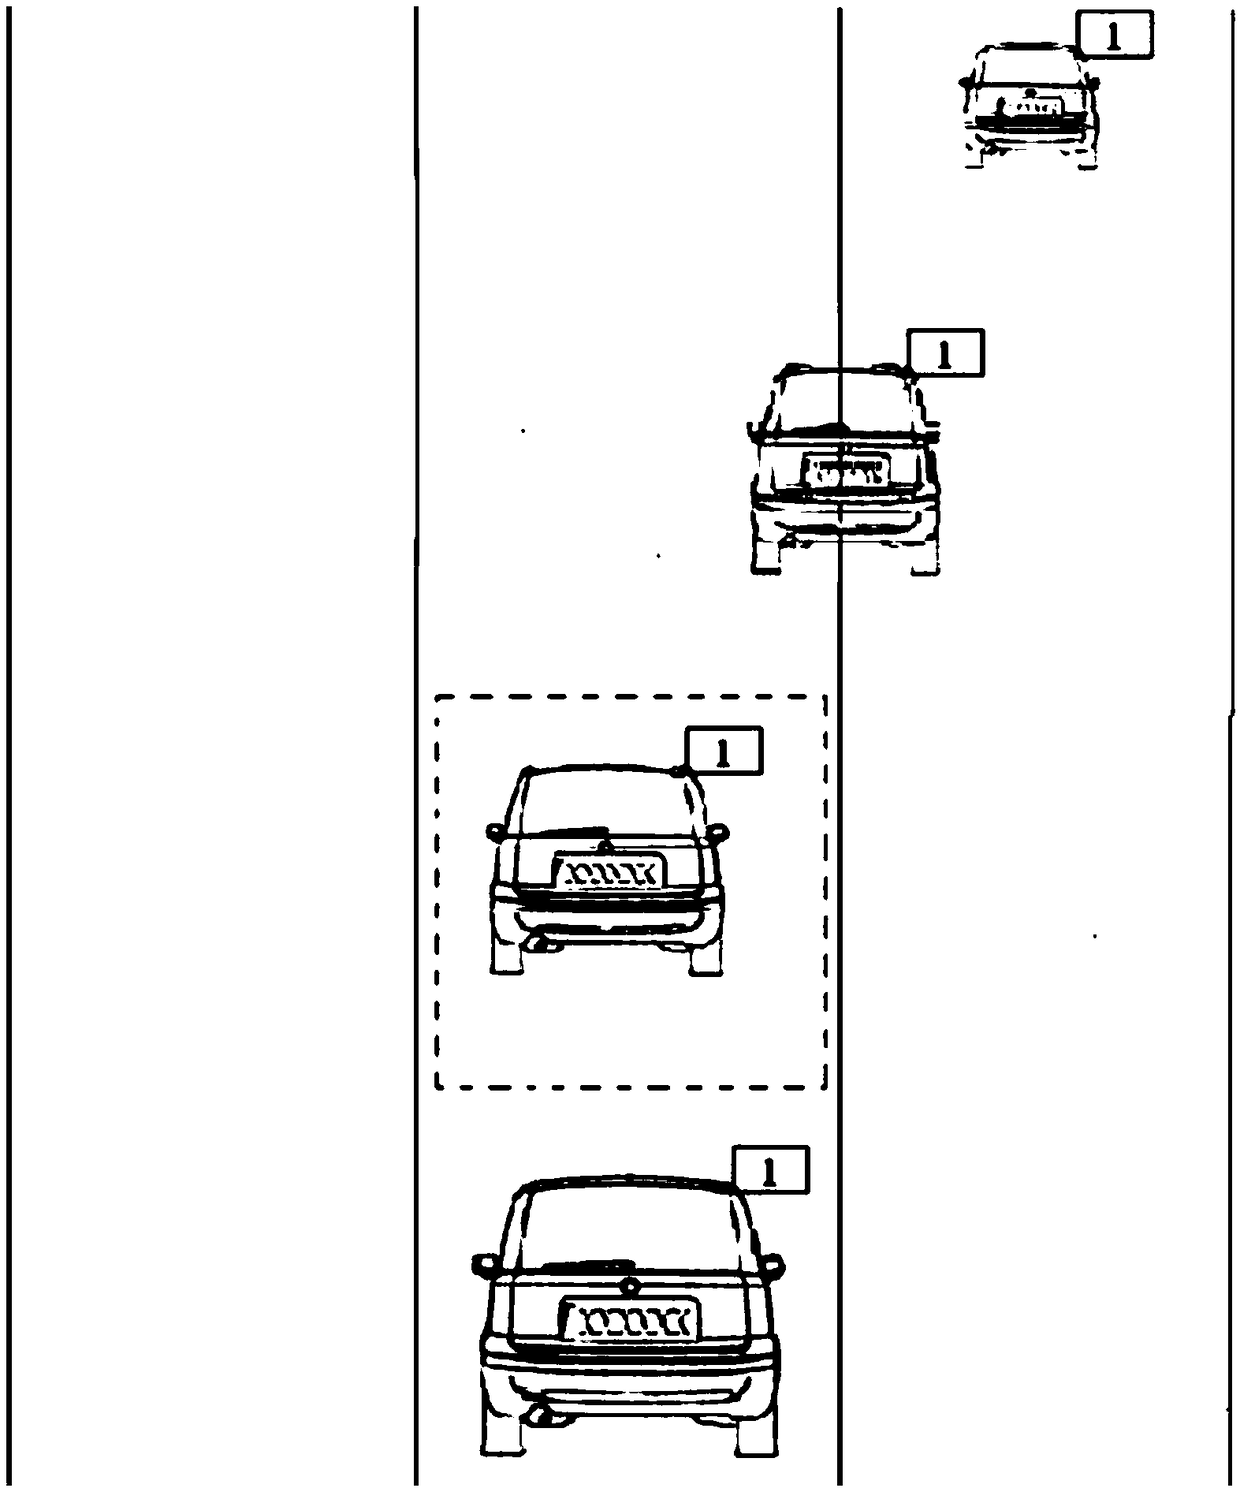 Method and apparatus for recording behavior of illegal occupation of emergency lane by motor vehicle